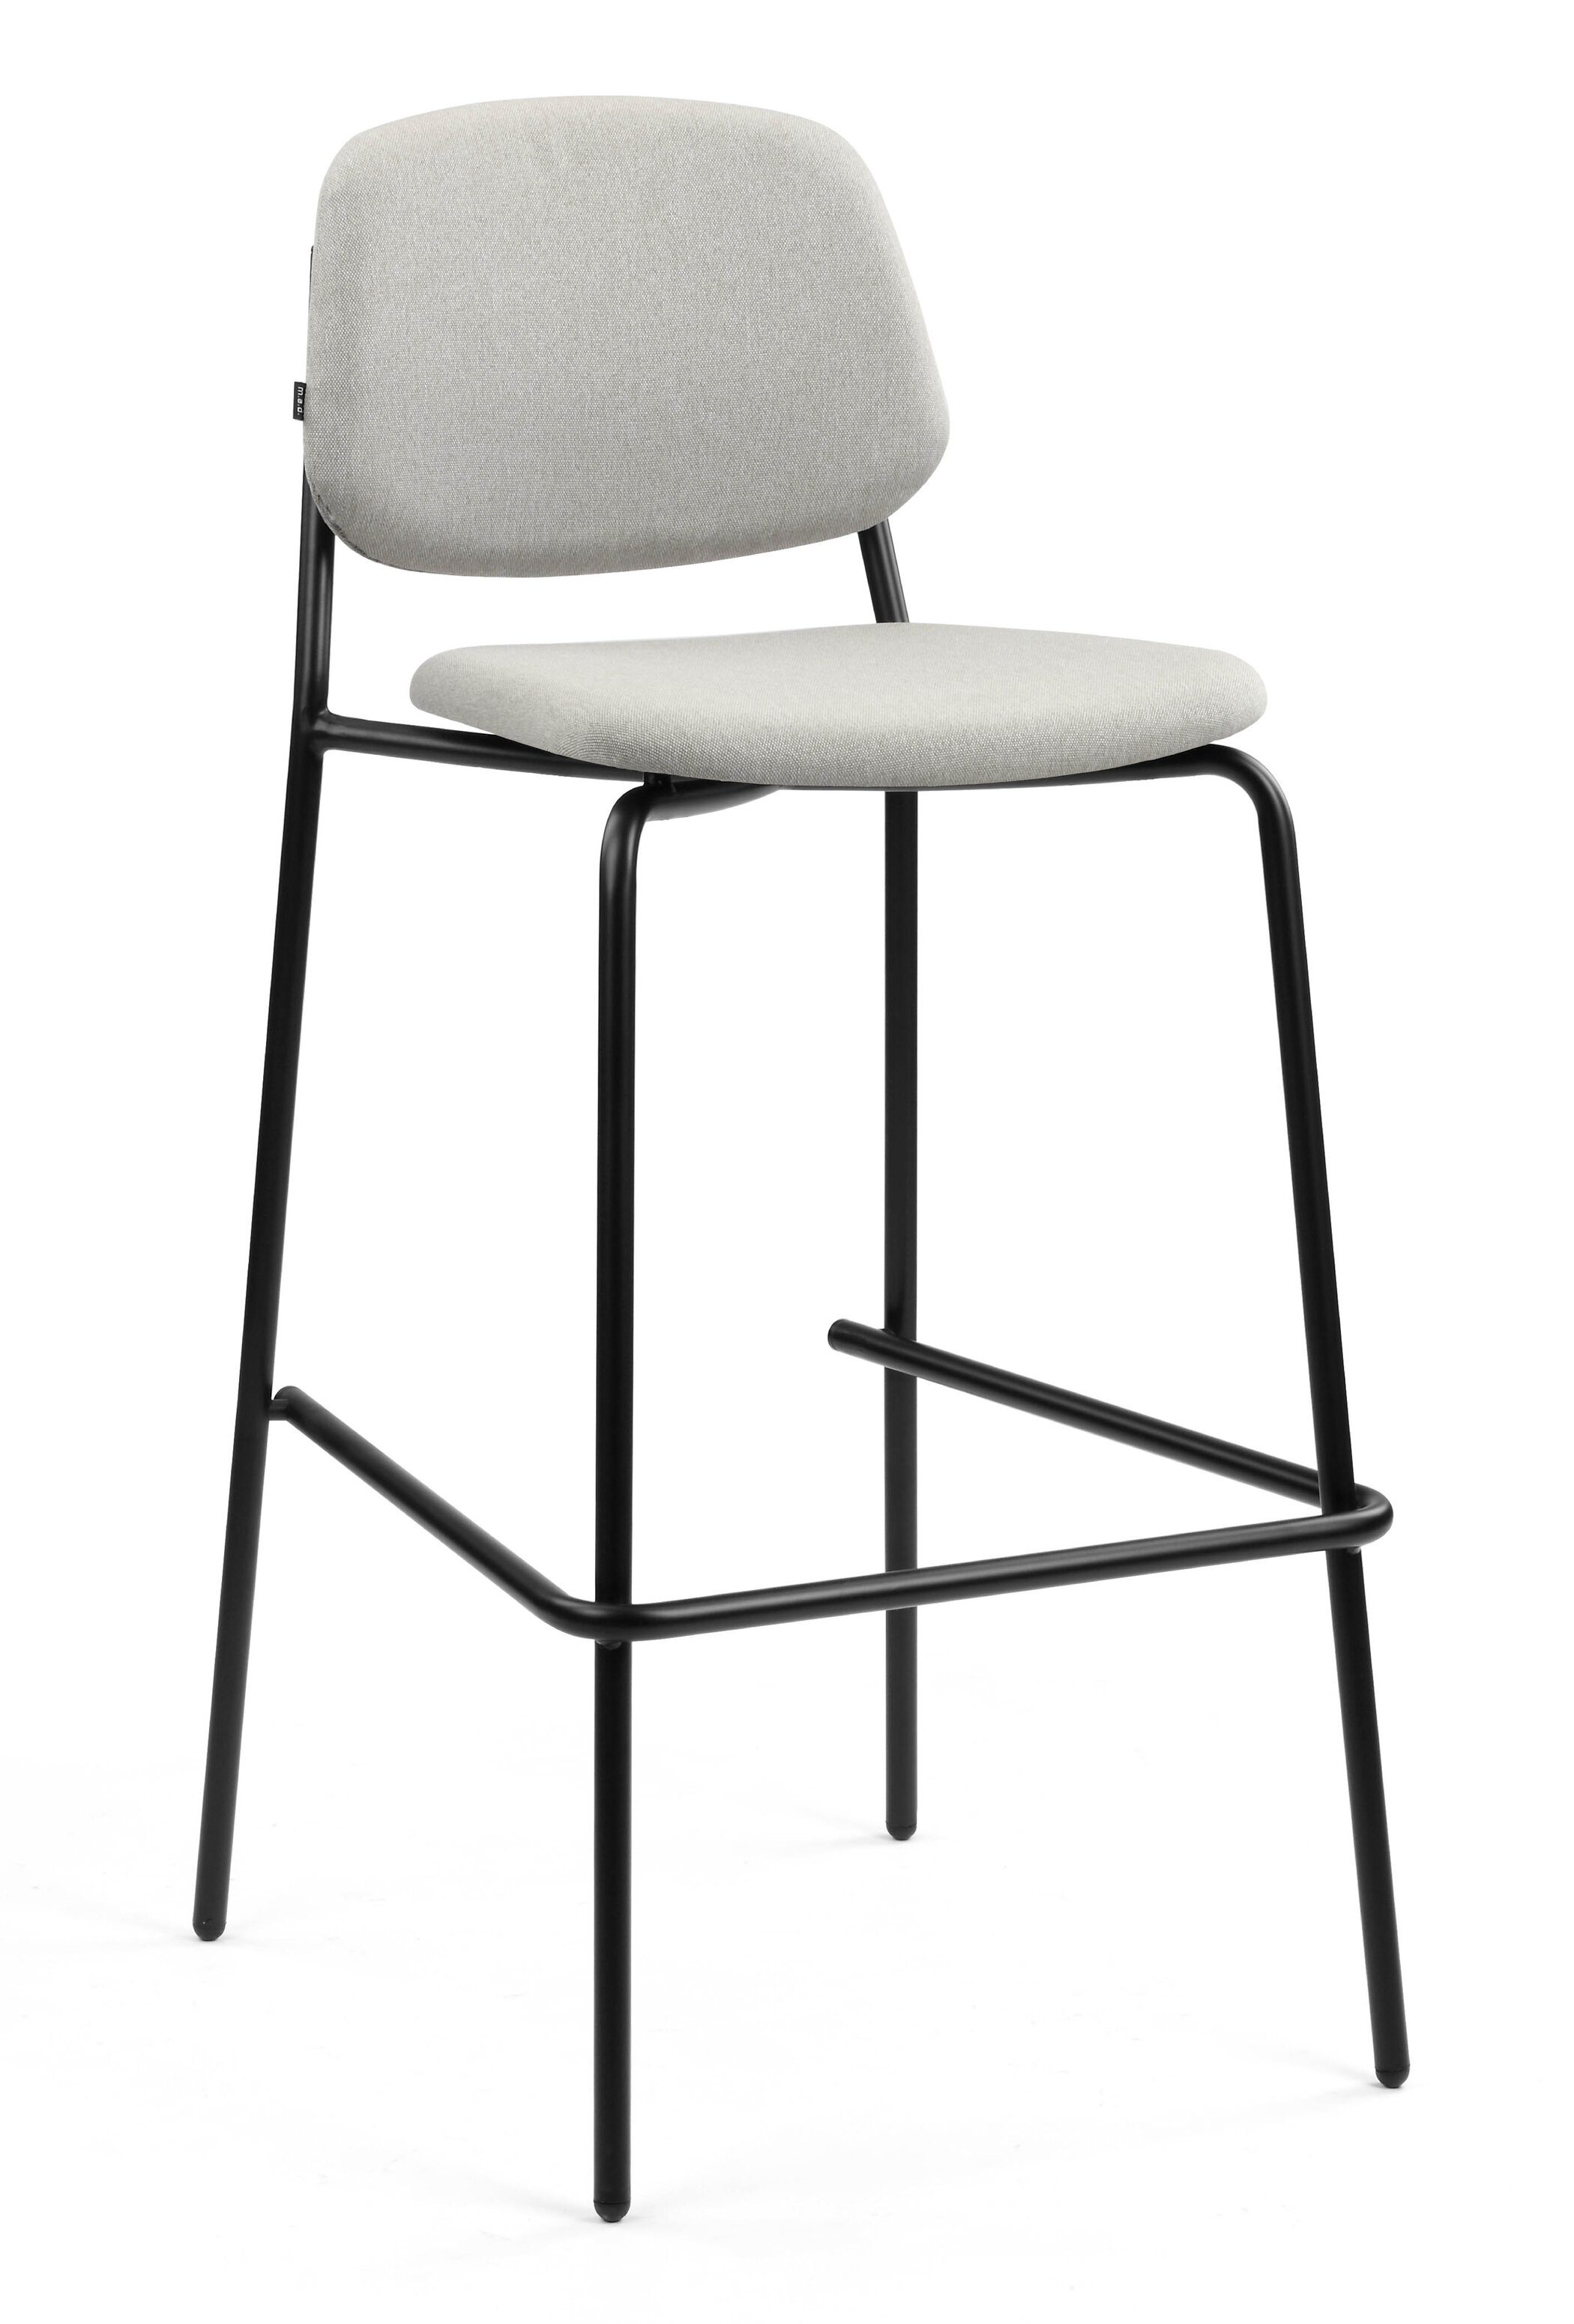 WS - Platform high stool - UPH Grey (Front angle)